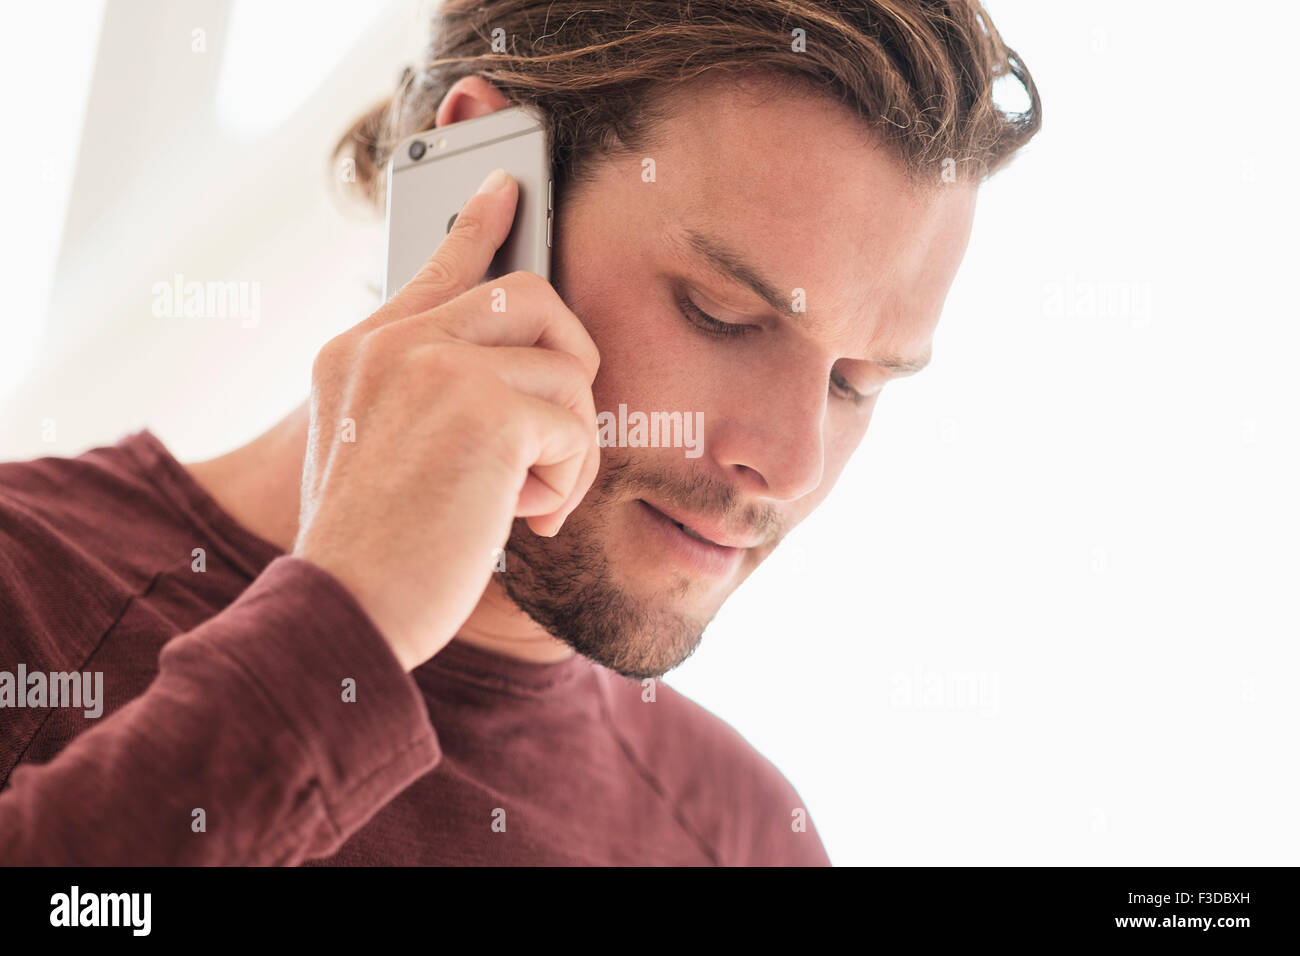 Mid-adult man talking on phone Banque D'Images